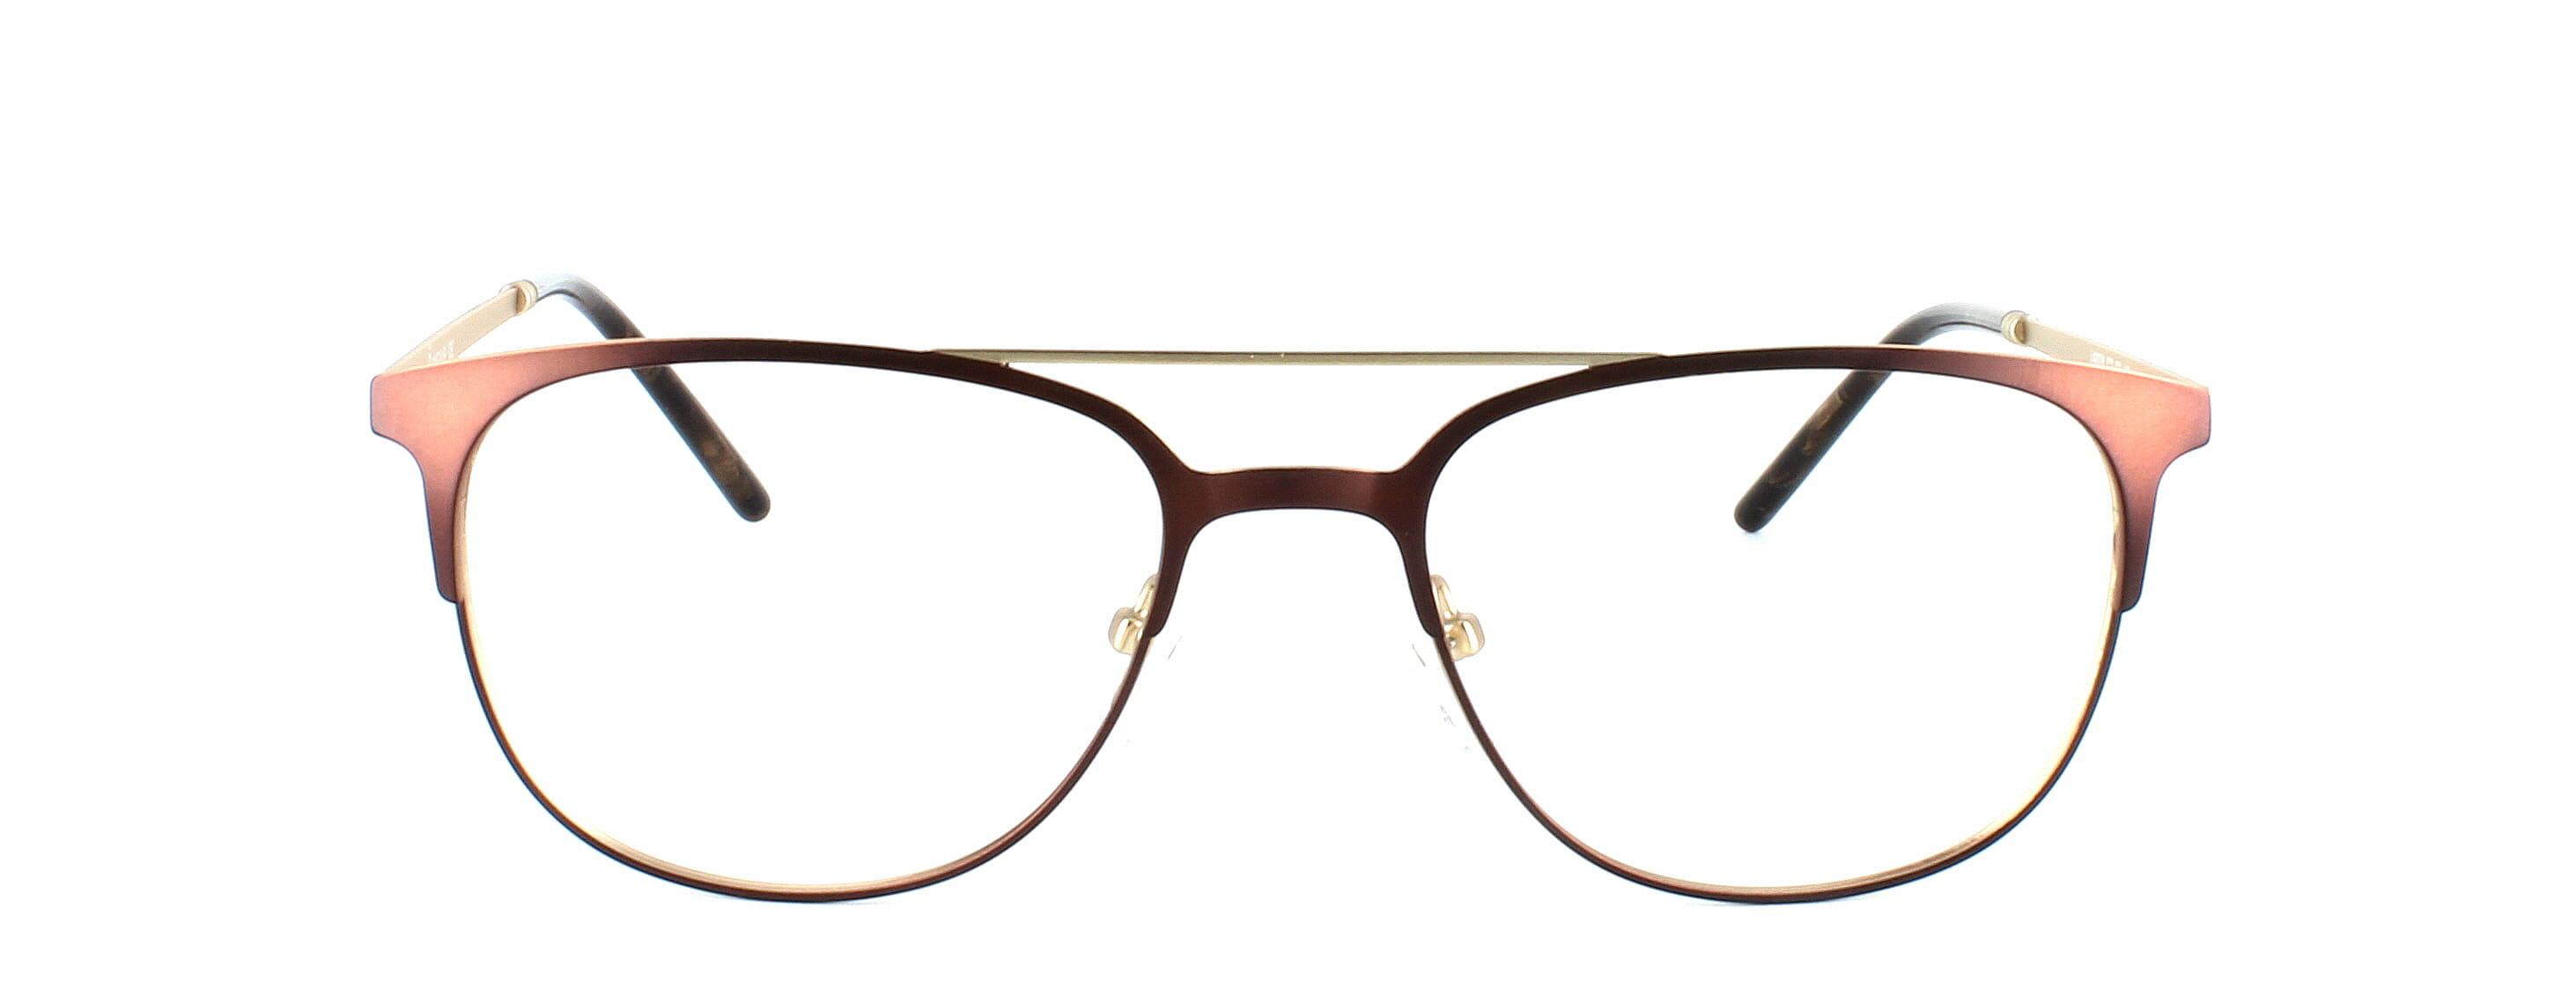 Nyton - Ladies full rim metal glasses in brown and gold - image view 5